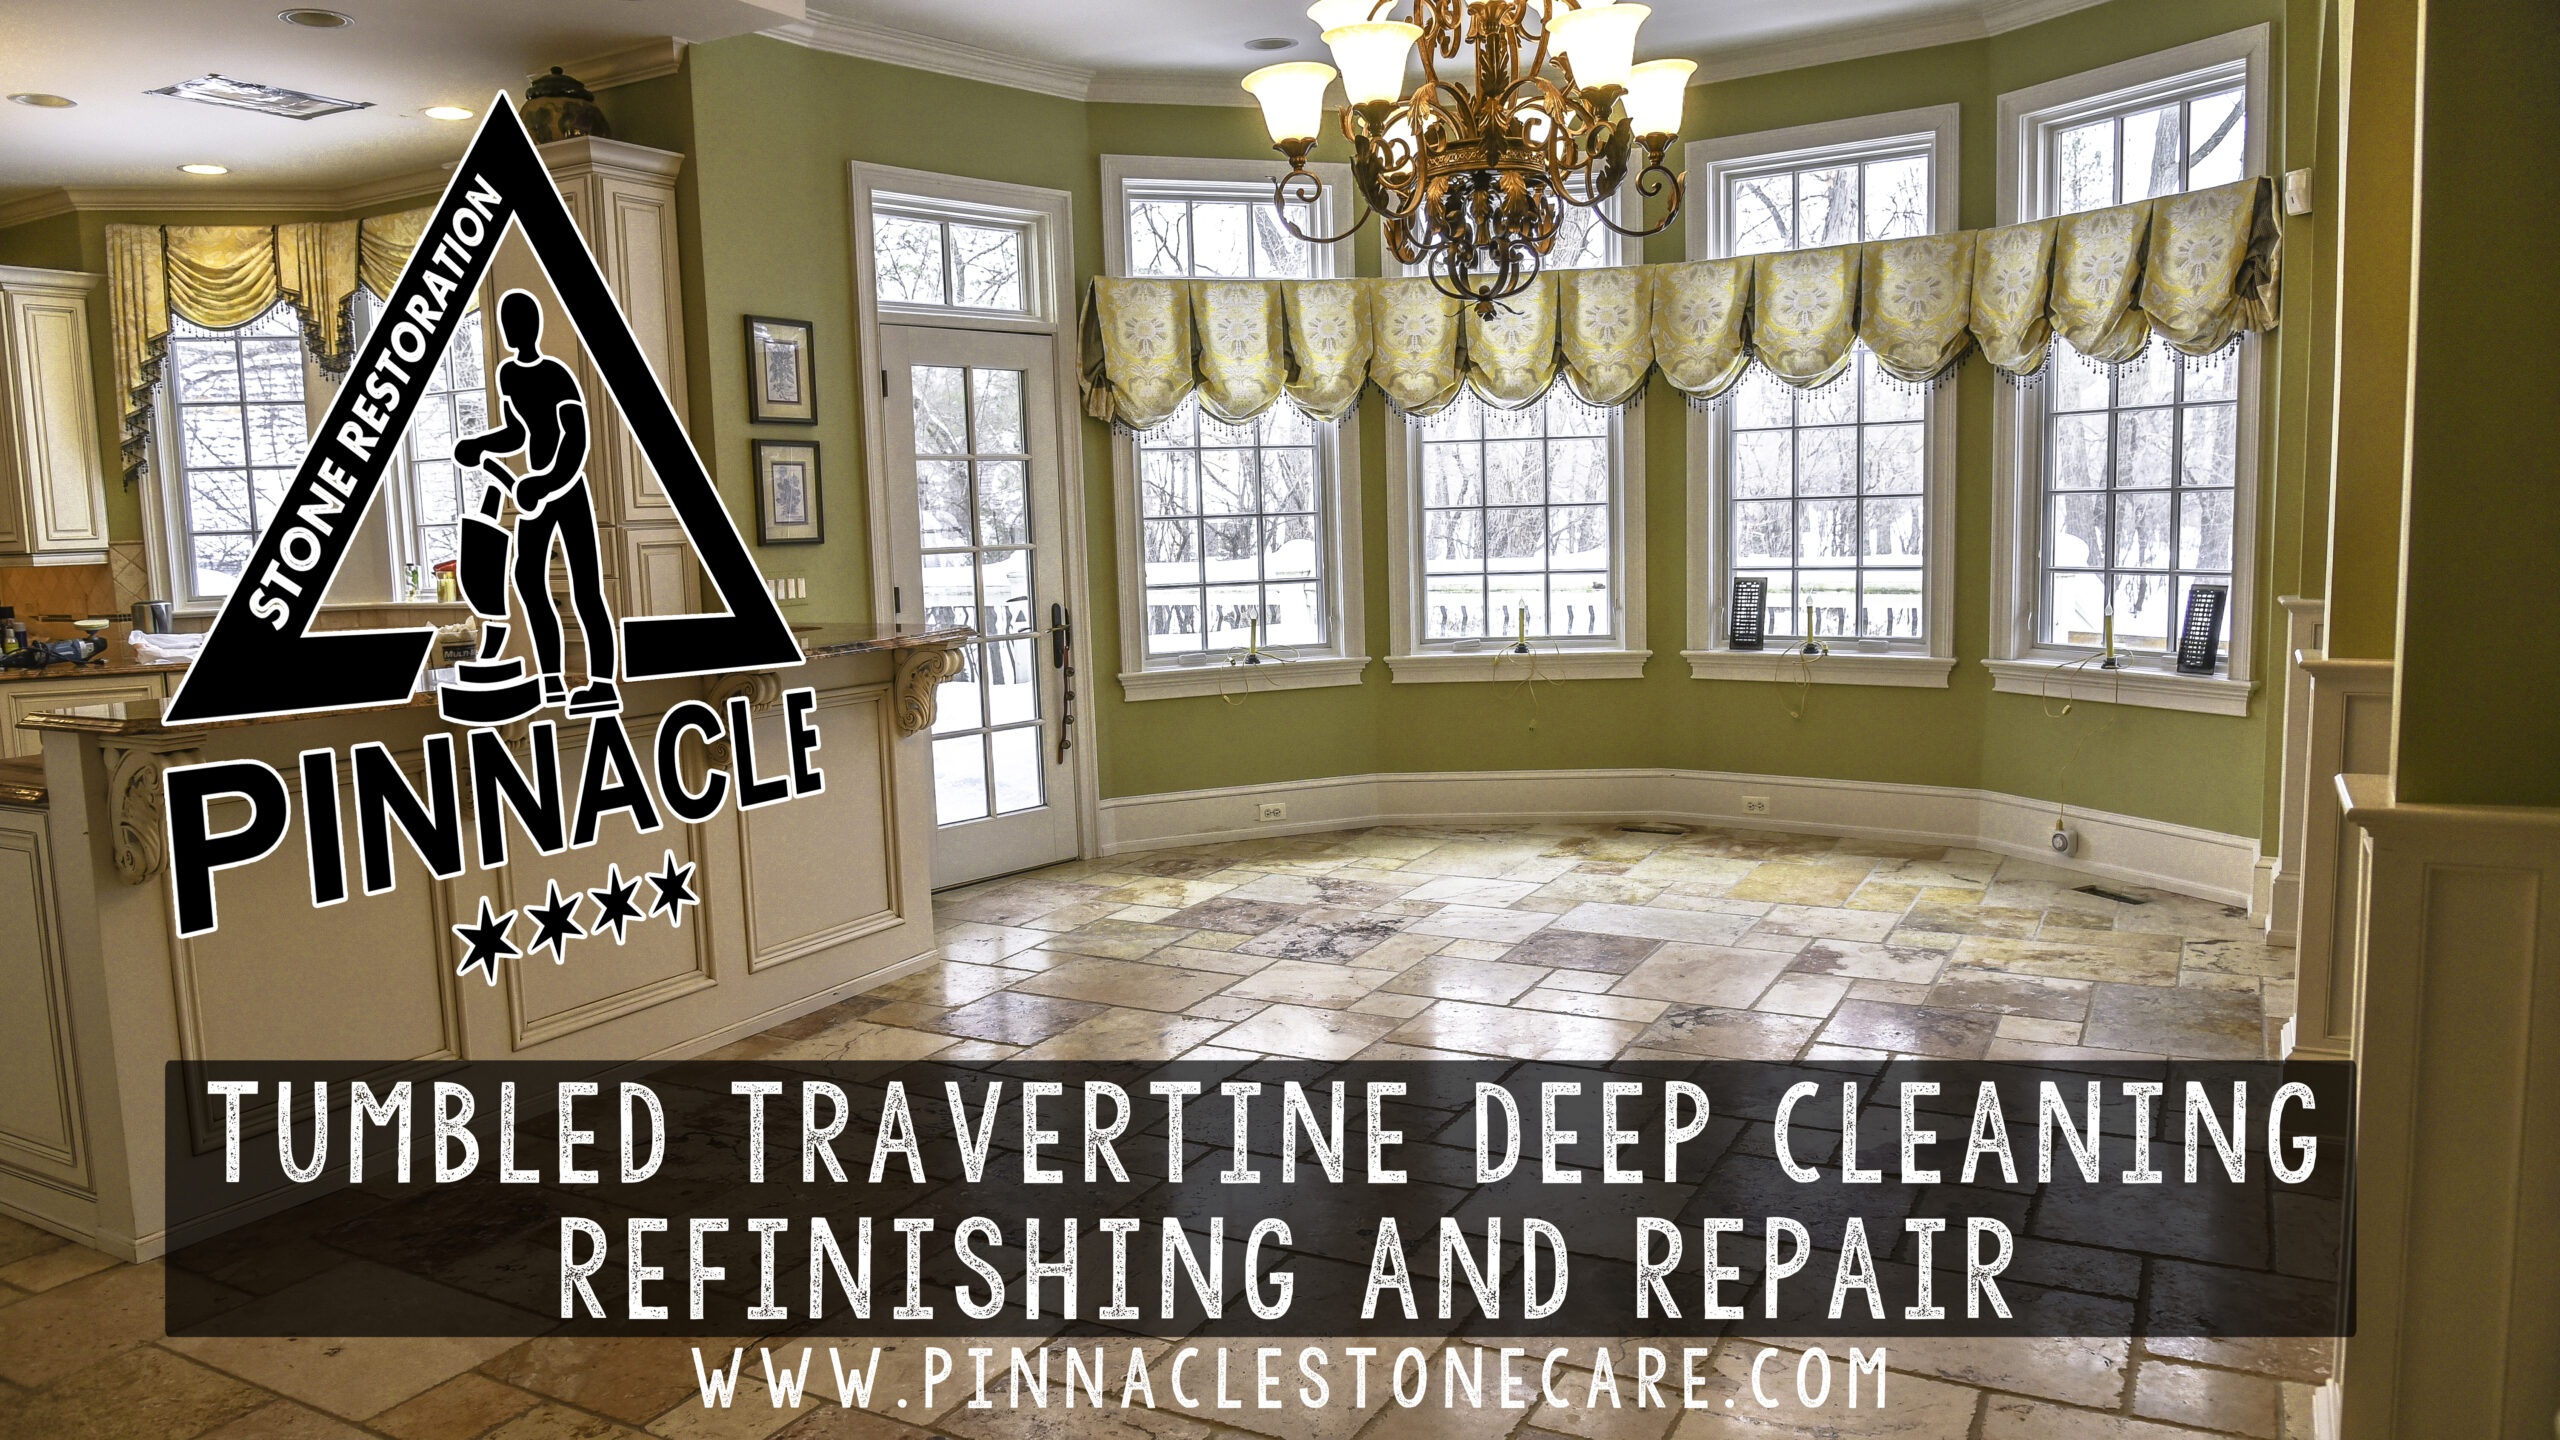 Tumbled travertine deep cleaning, refinishing, and repair in Chicago, IL